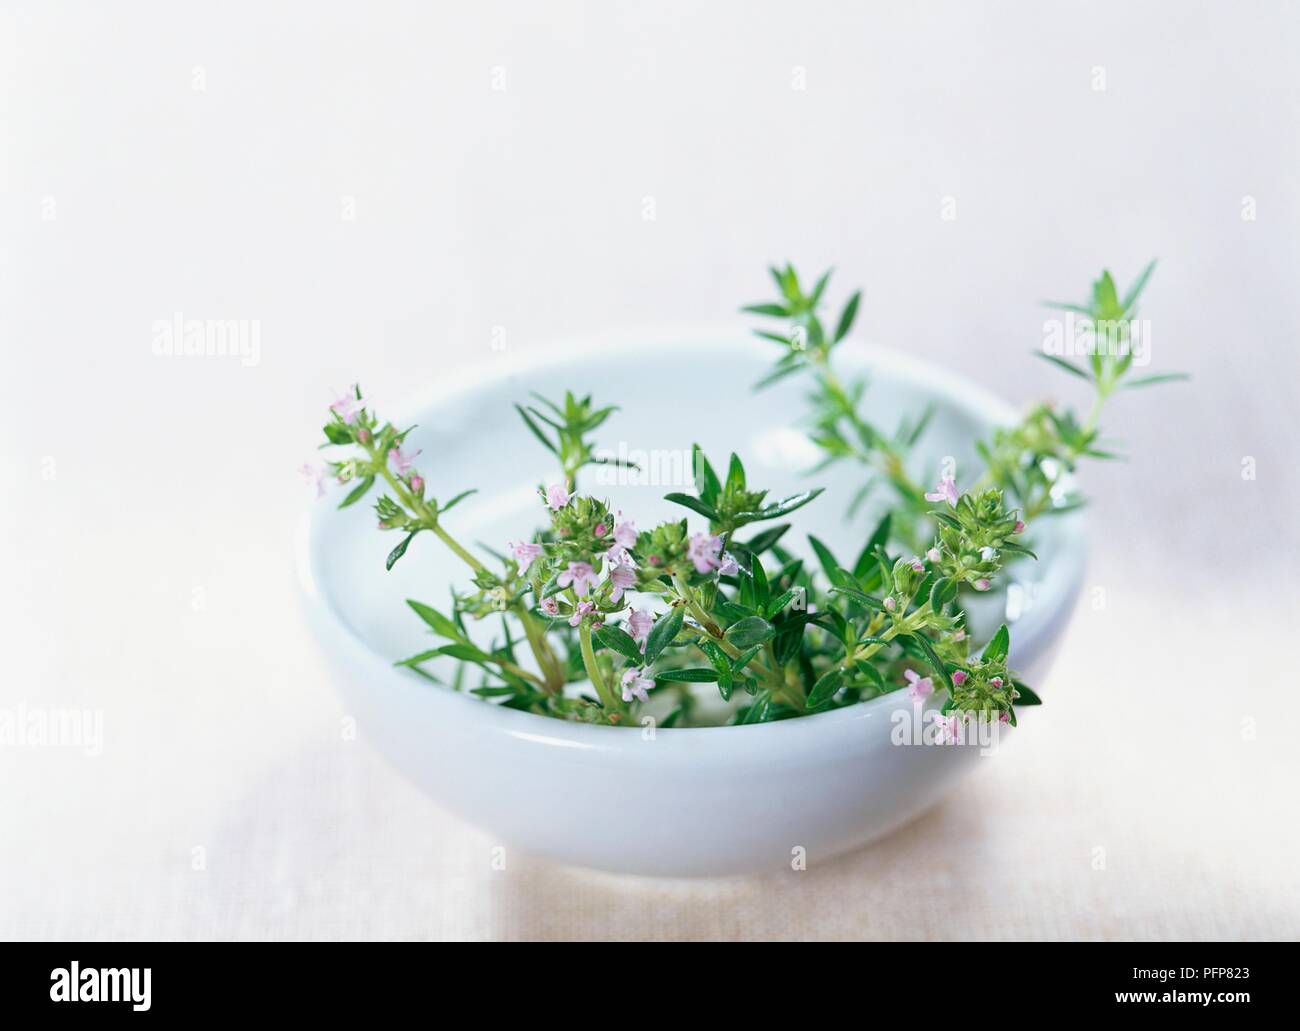 Thymus x citriodorus 'Lemon Mist' (Lemon-scented thyme), fresh sprigs of leaves with tiny purple flowers, in a ceramic bowl Stock Photo